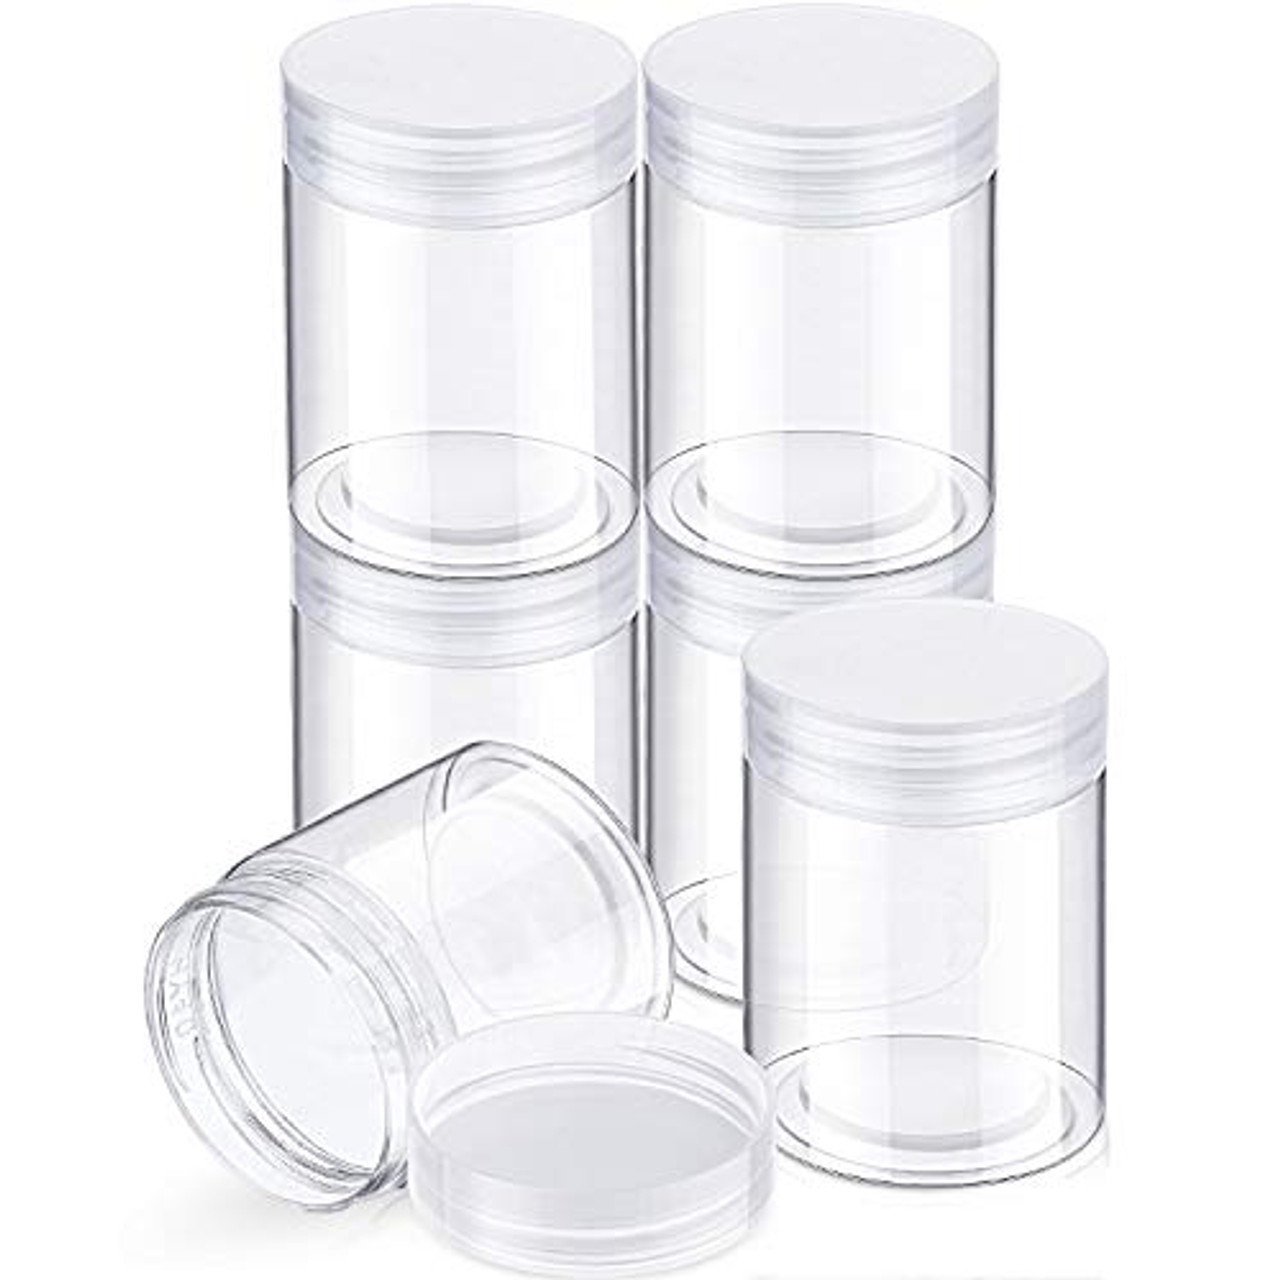 10 oz Round Container with Lid